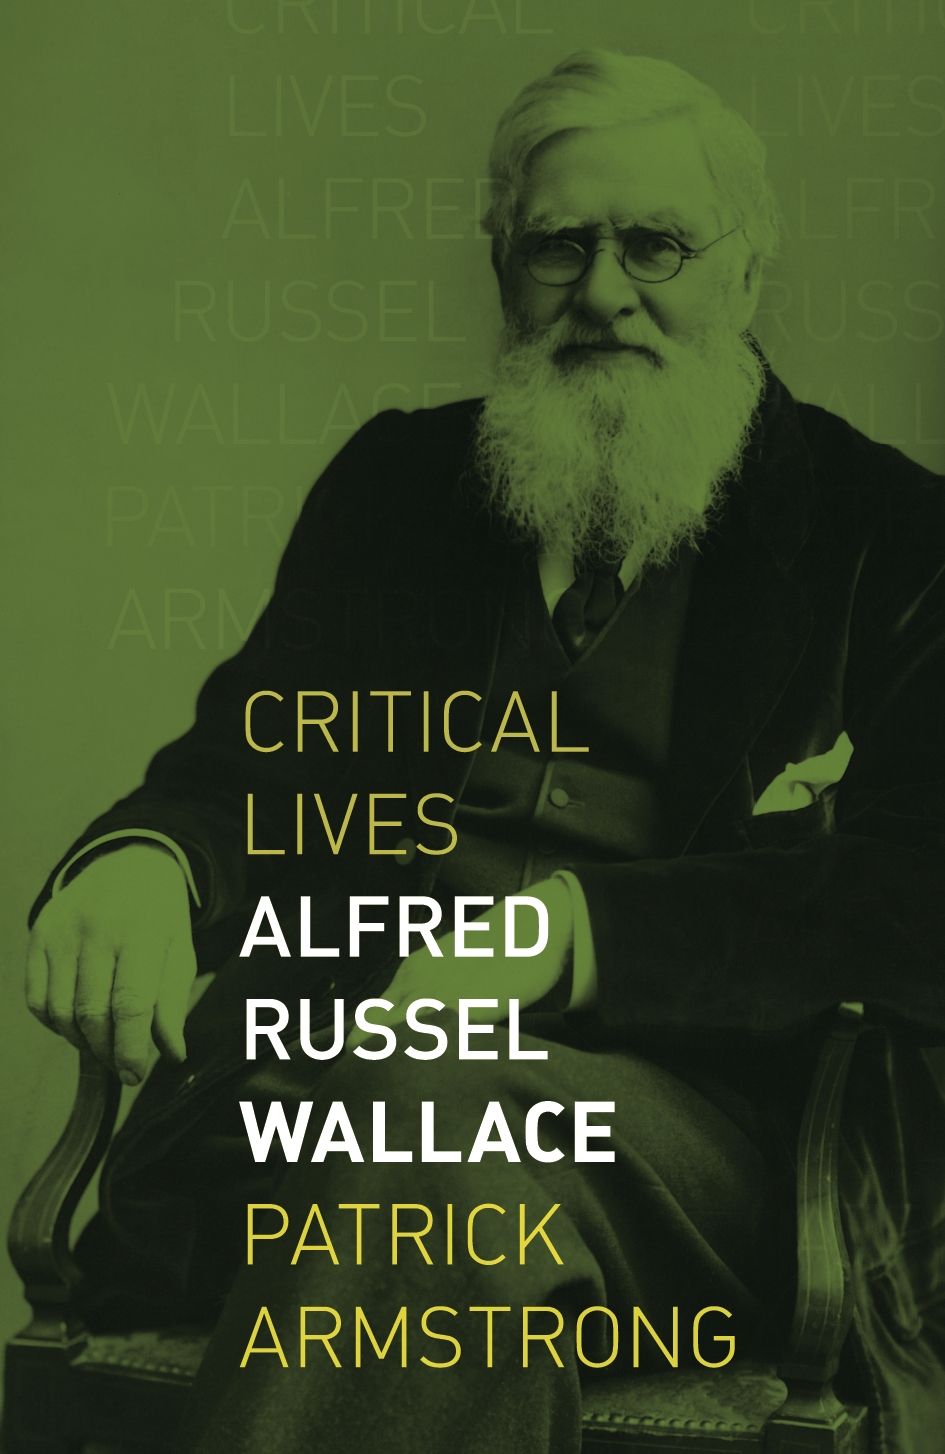 Alfred Russel Wallace Armstrong